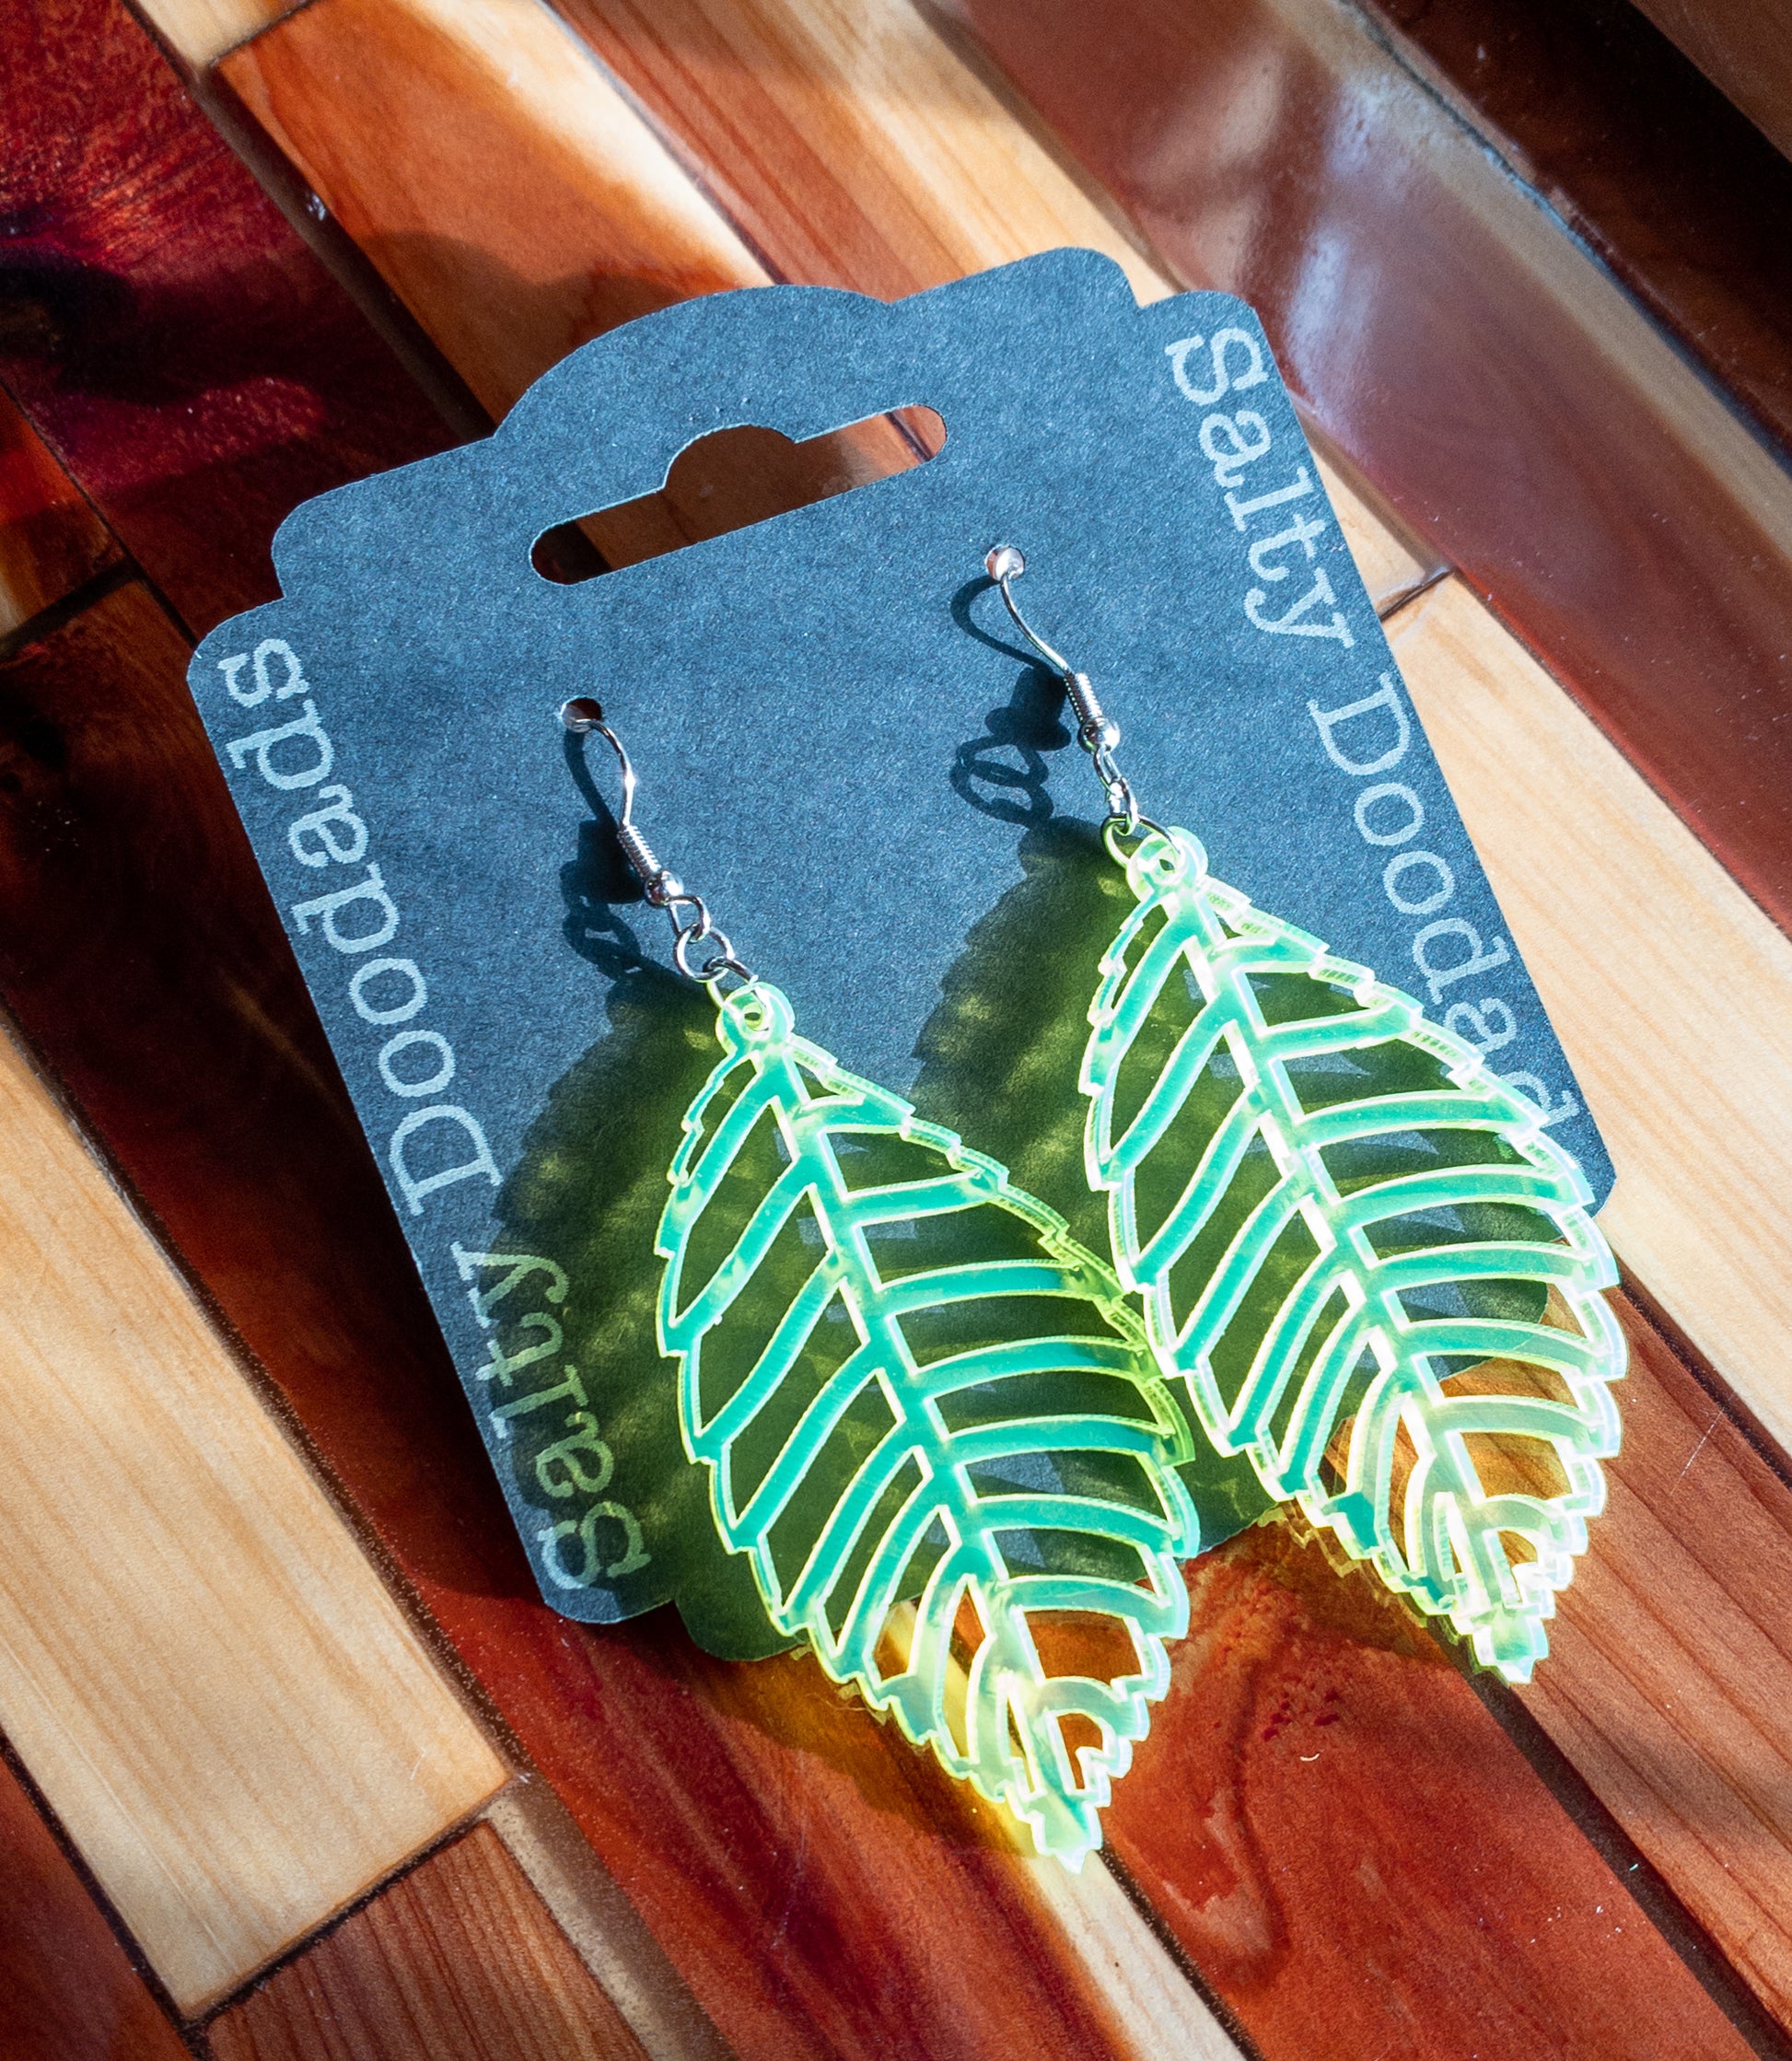 Translucent Neon Leaf Dangle Earrings - The Salty Lick Mercantile